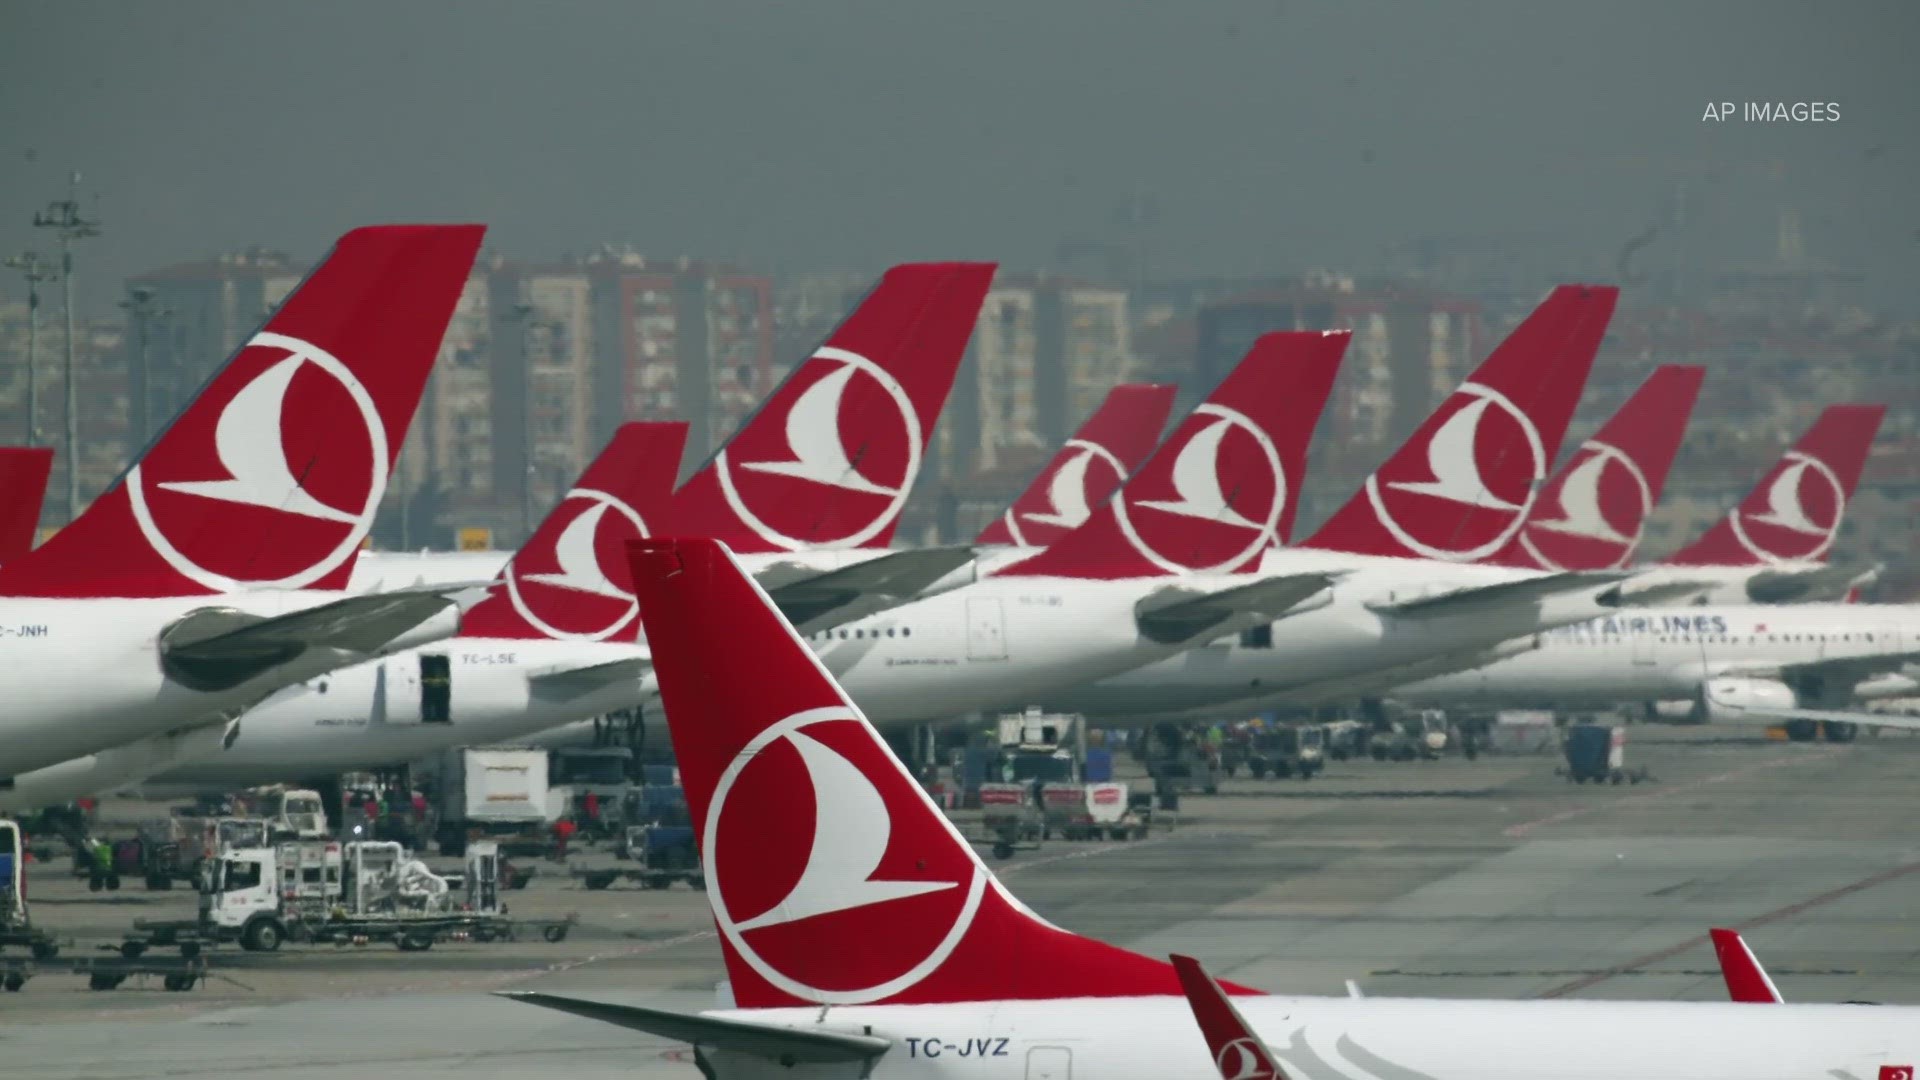 Turkish Airlines will be the 26th airline to conduct service at Denver International Airport.